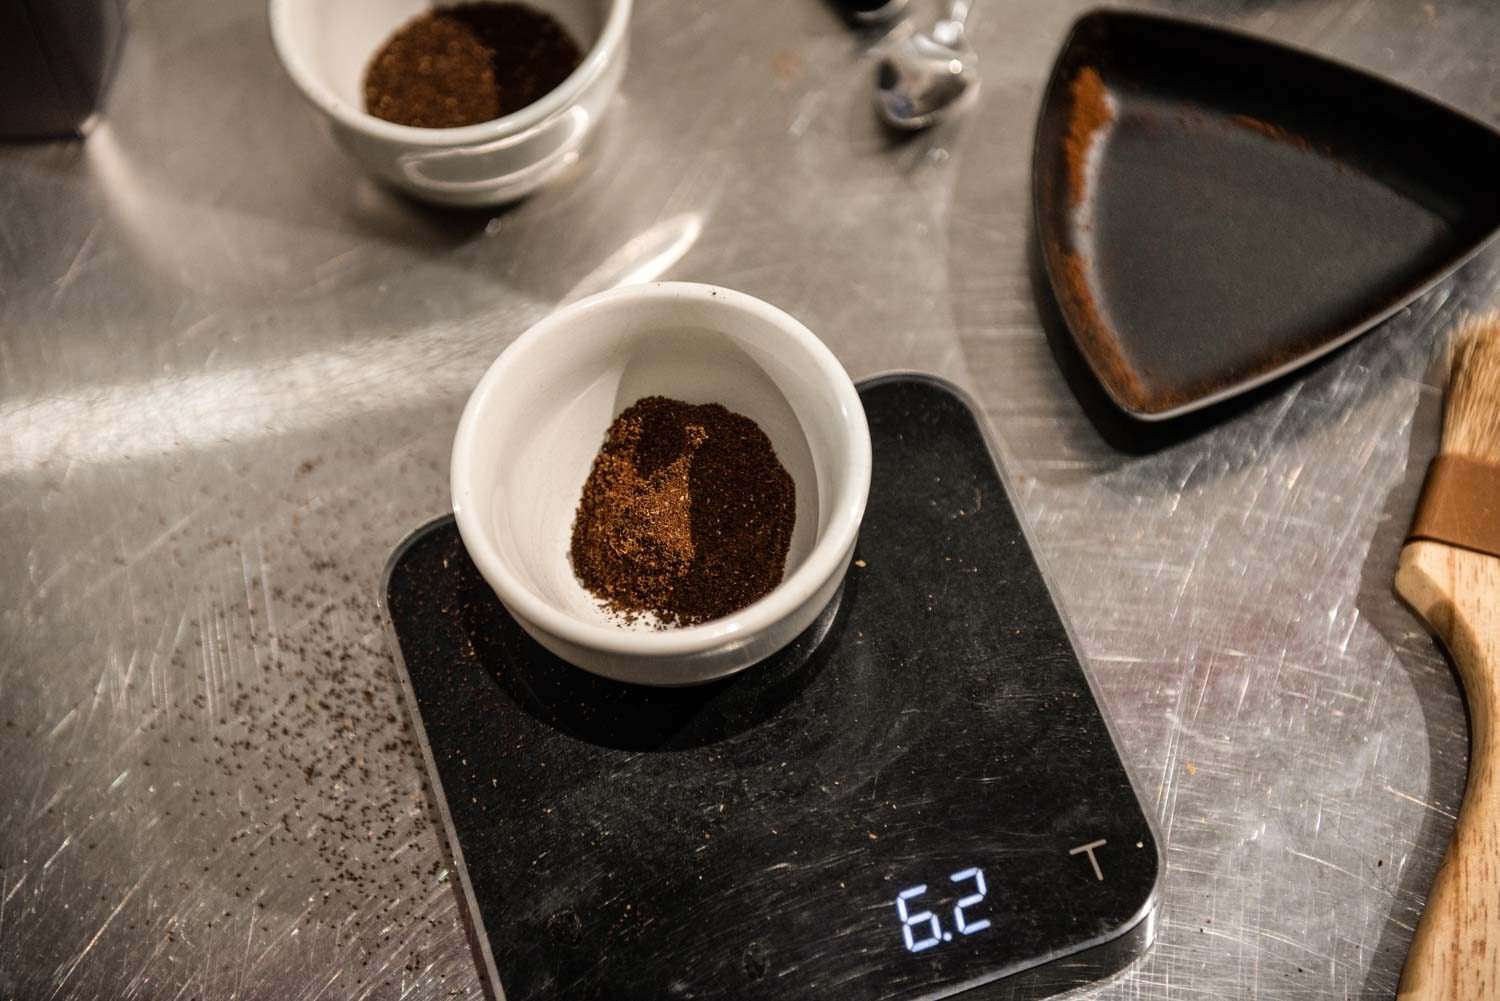 Weighing a portion of sifted coffee grounds